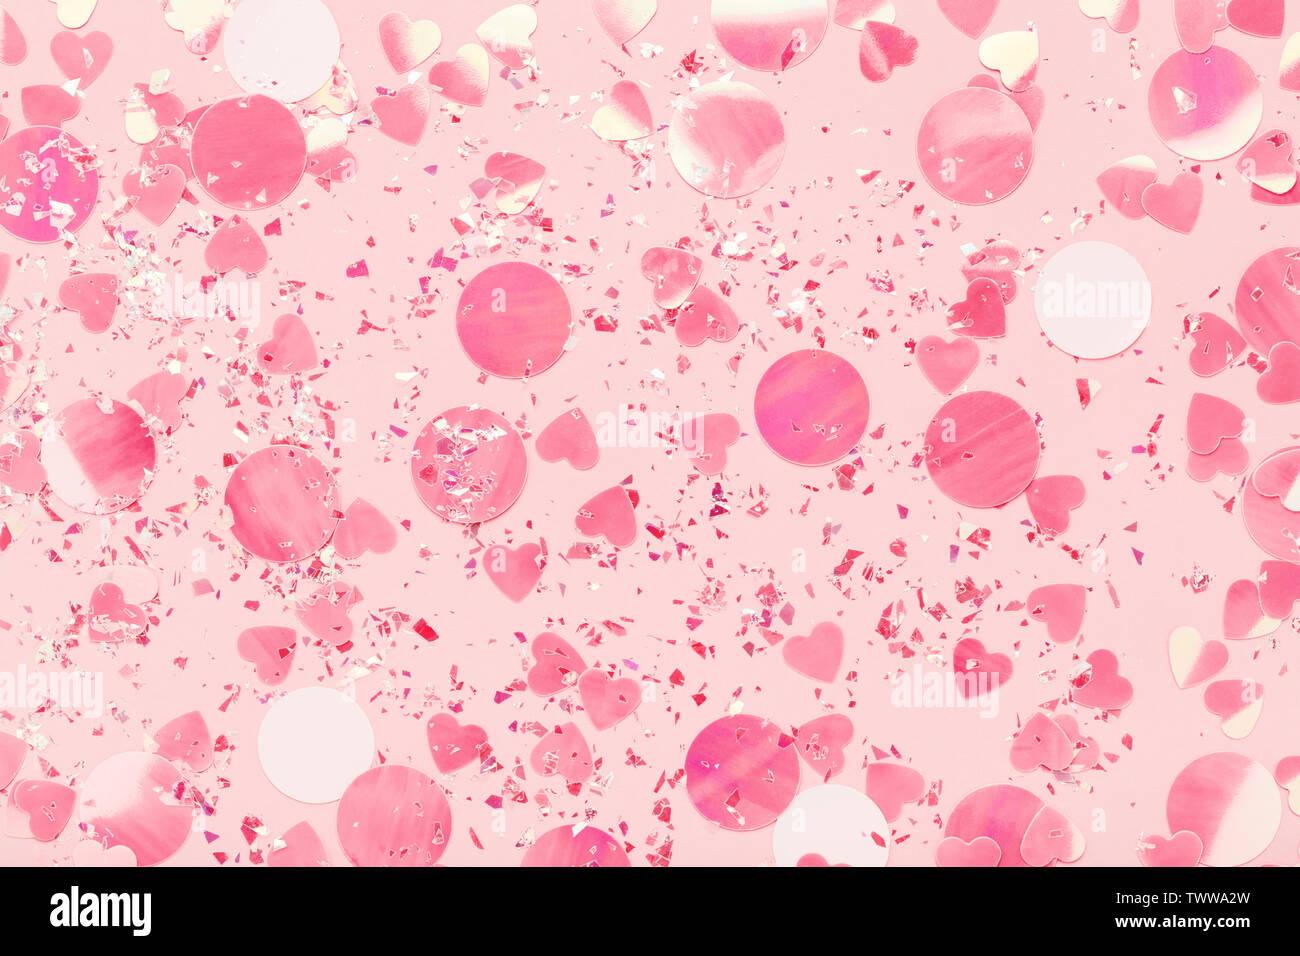 Celebrate with style using Confetti background pink For your party needs